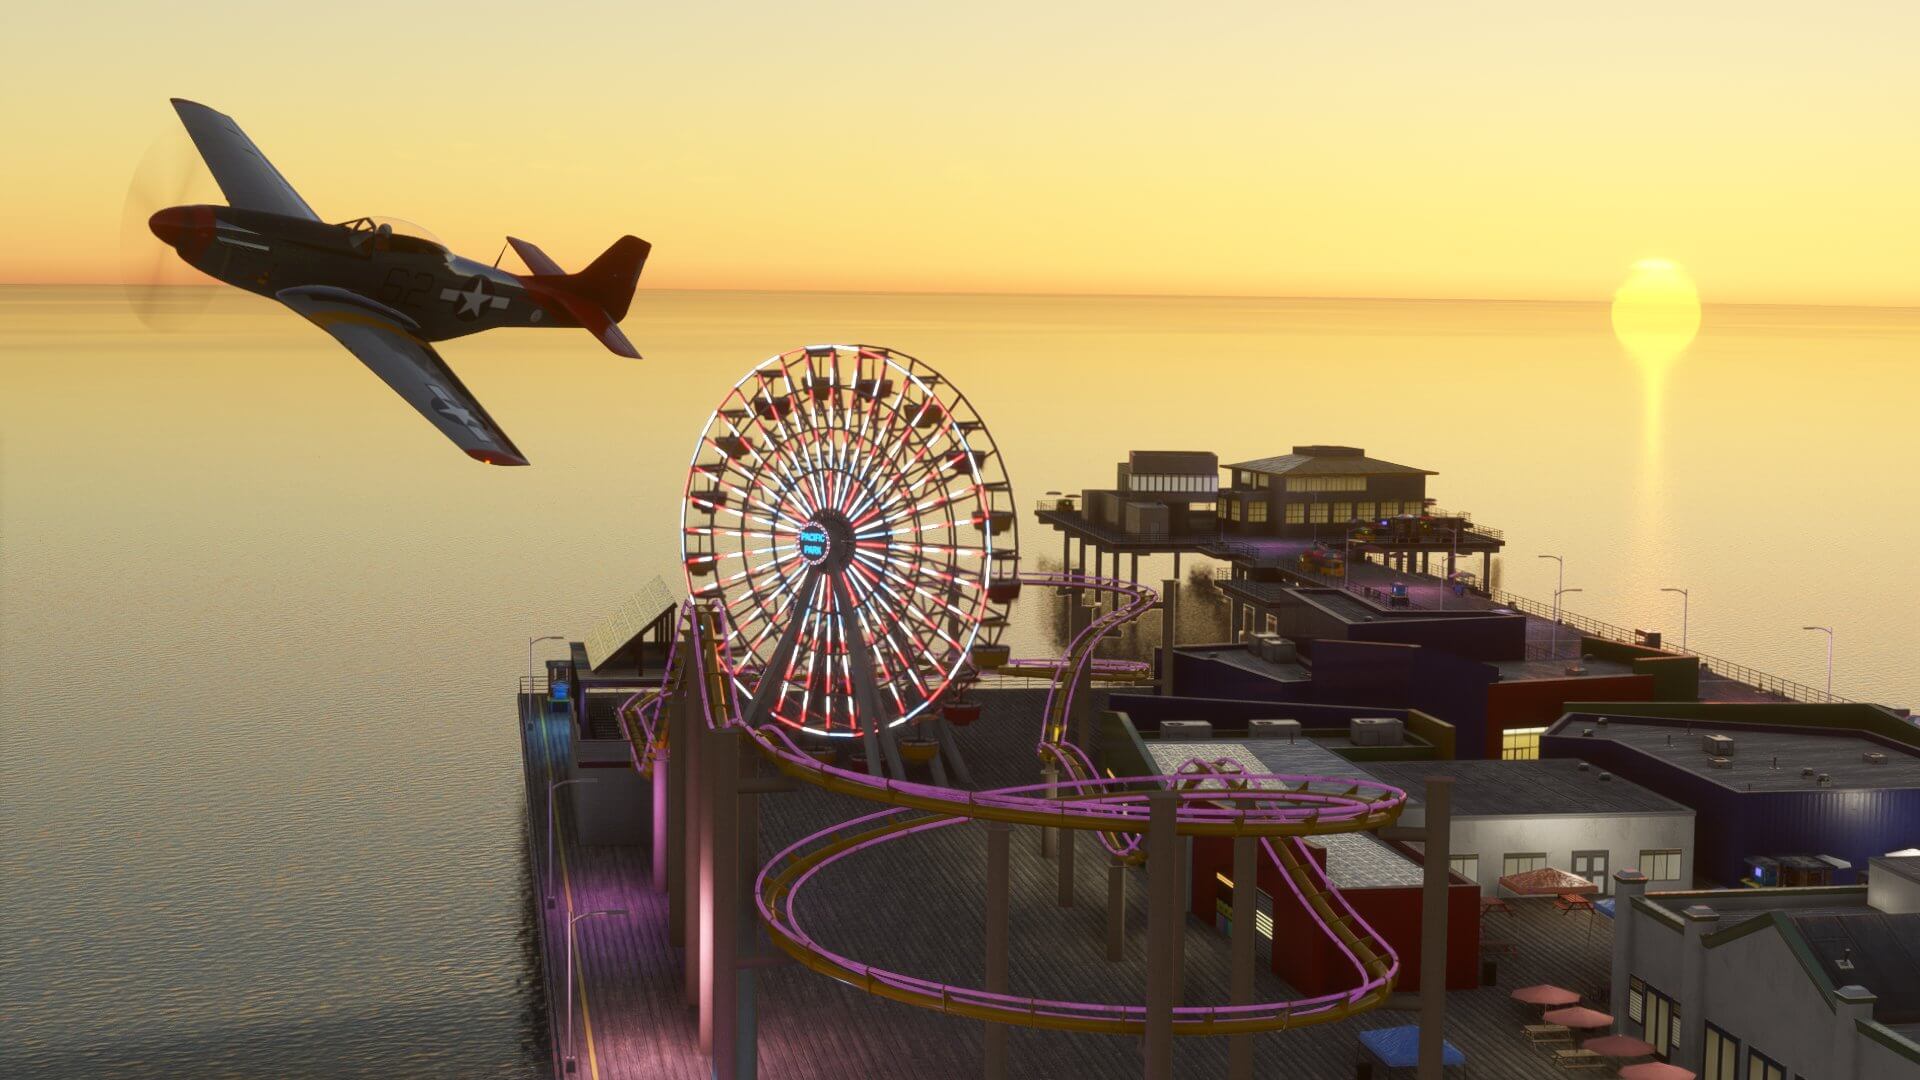 A P-51 Mustang flies over Venice Beach Pier in California with the sun setting on the horizon.